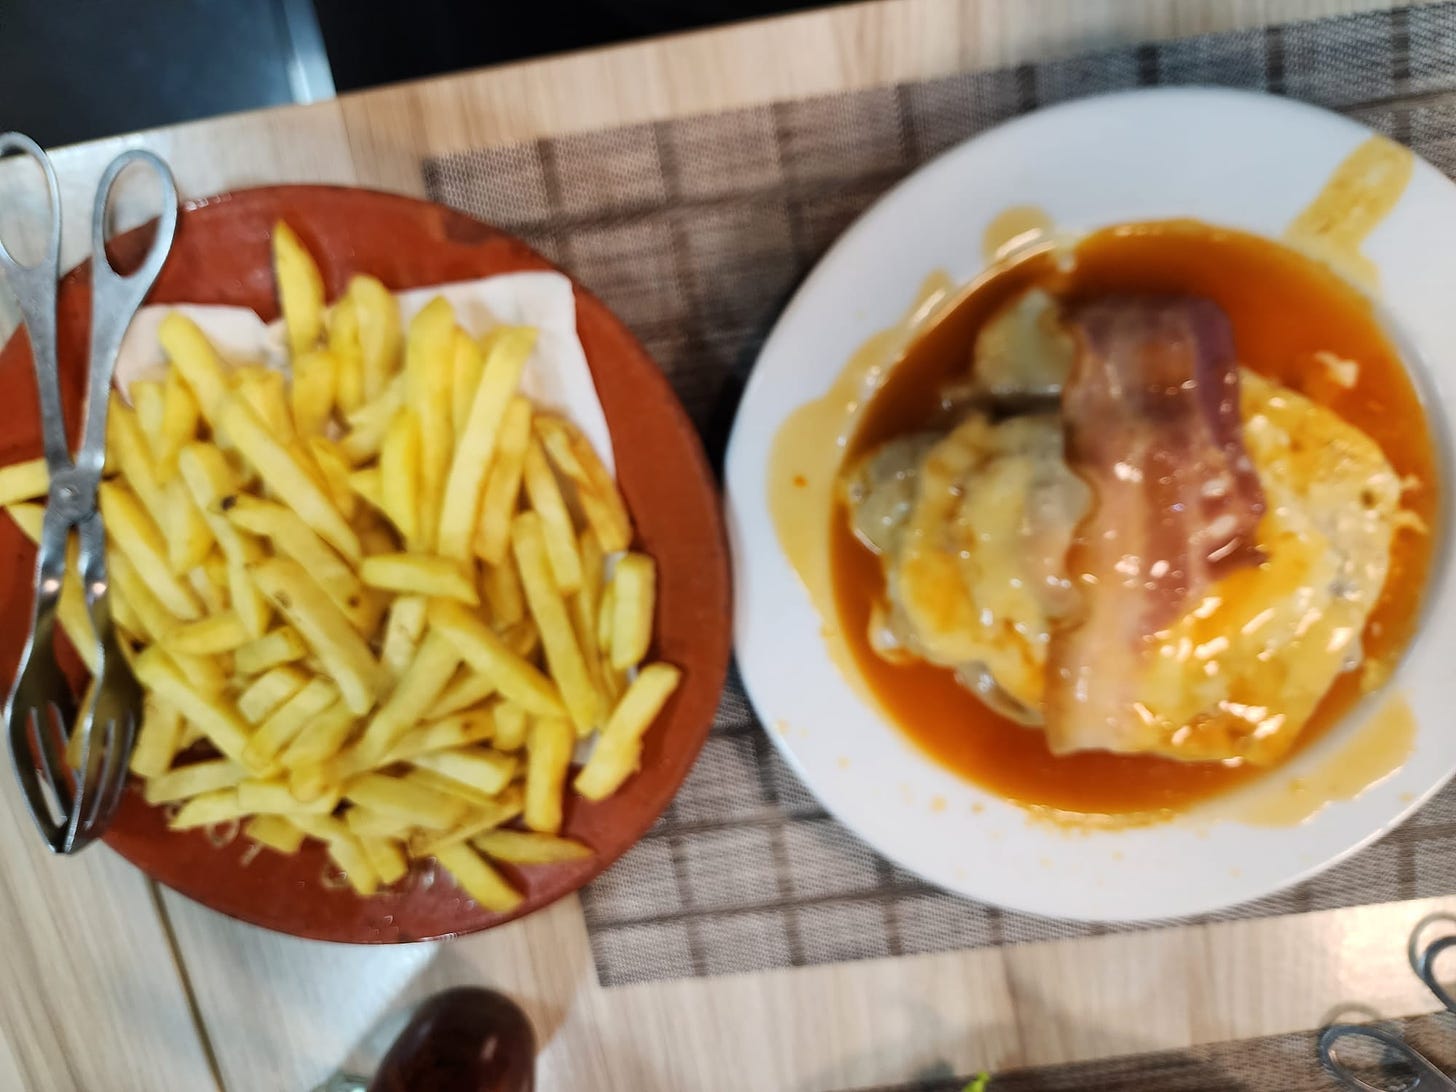 Blurry photo I took previously of a Francesinha and fries.